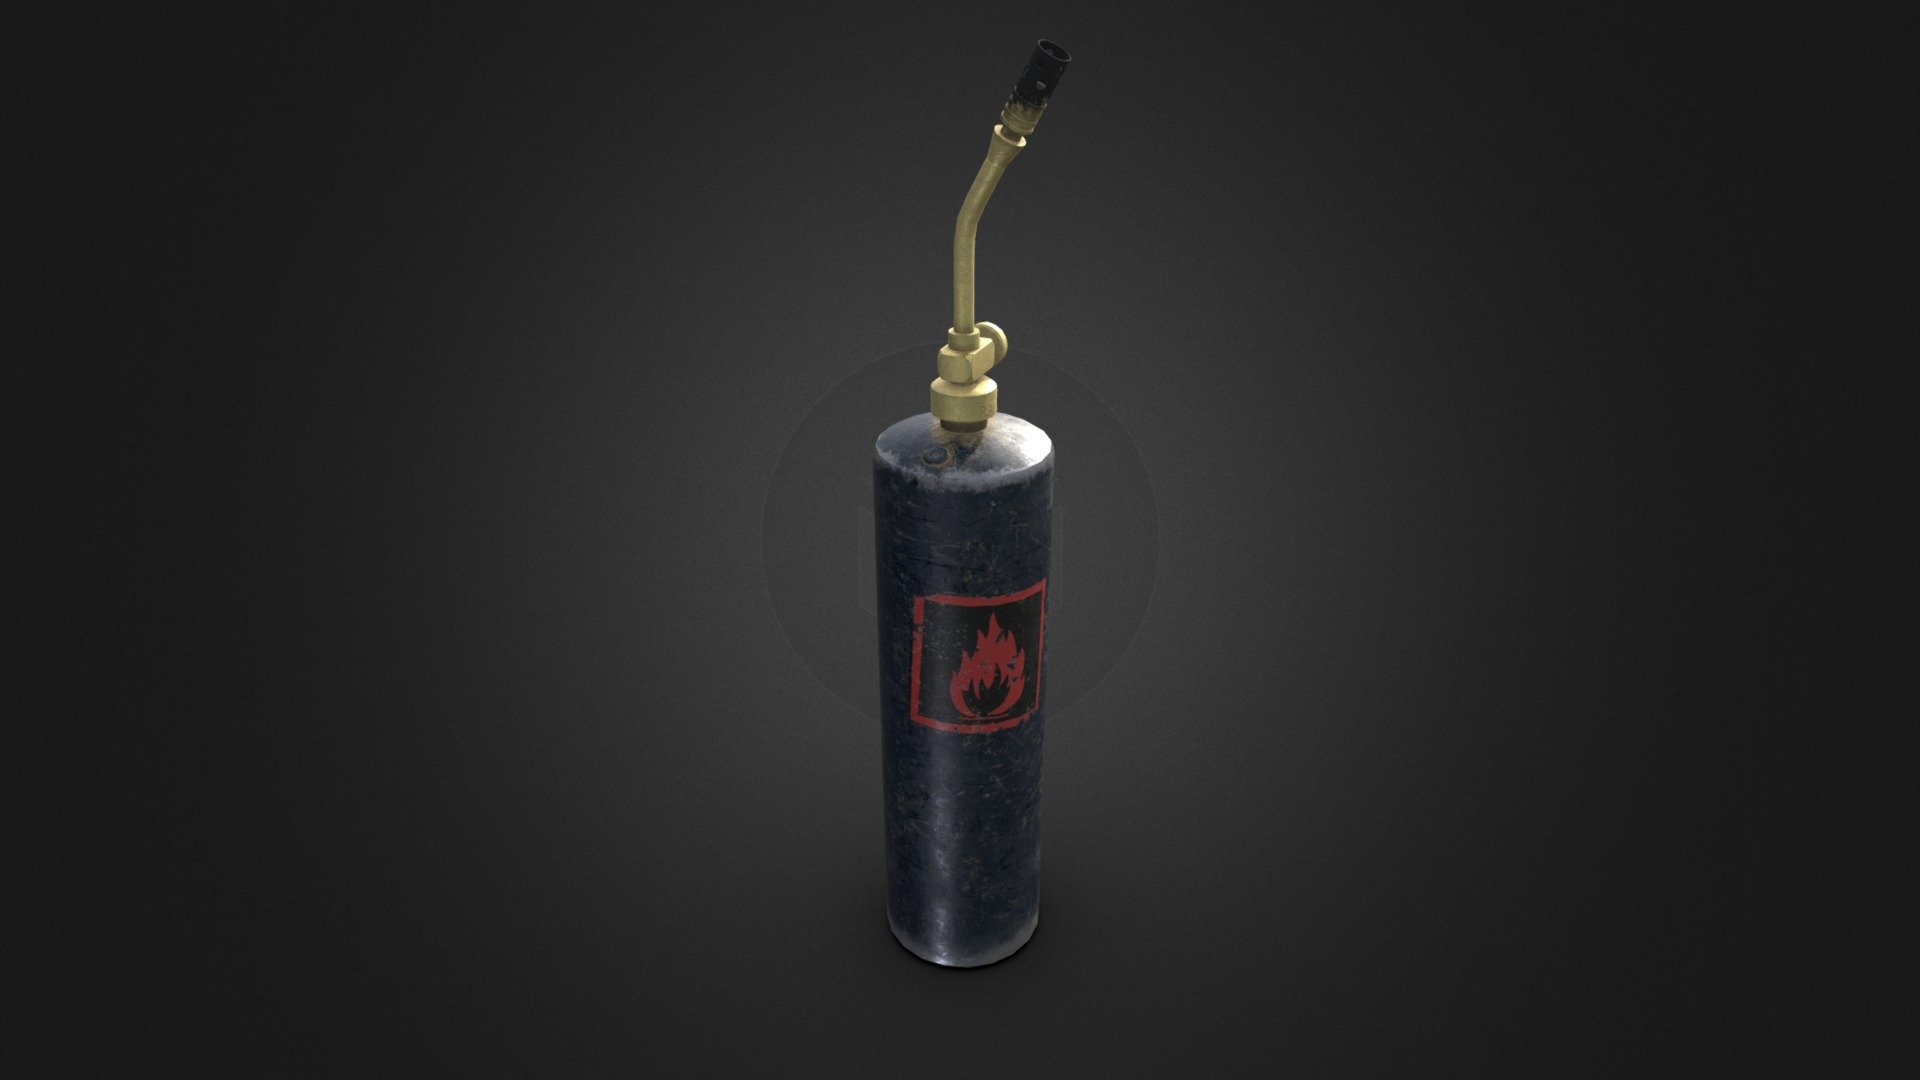 Extra crispy.

Another isolated asset from a multi prop project I am working on 3d model